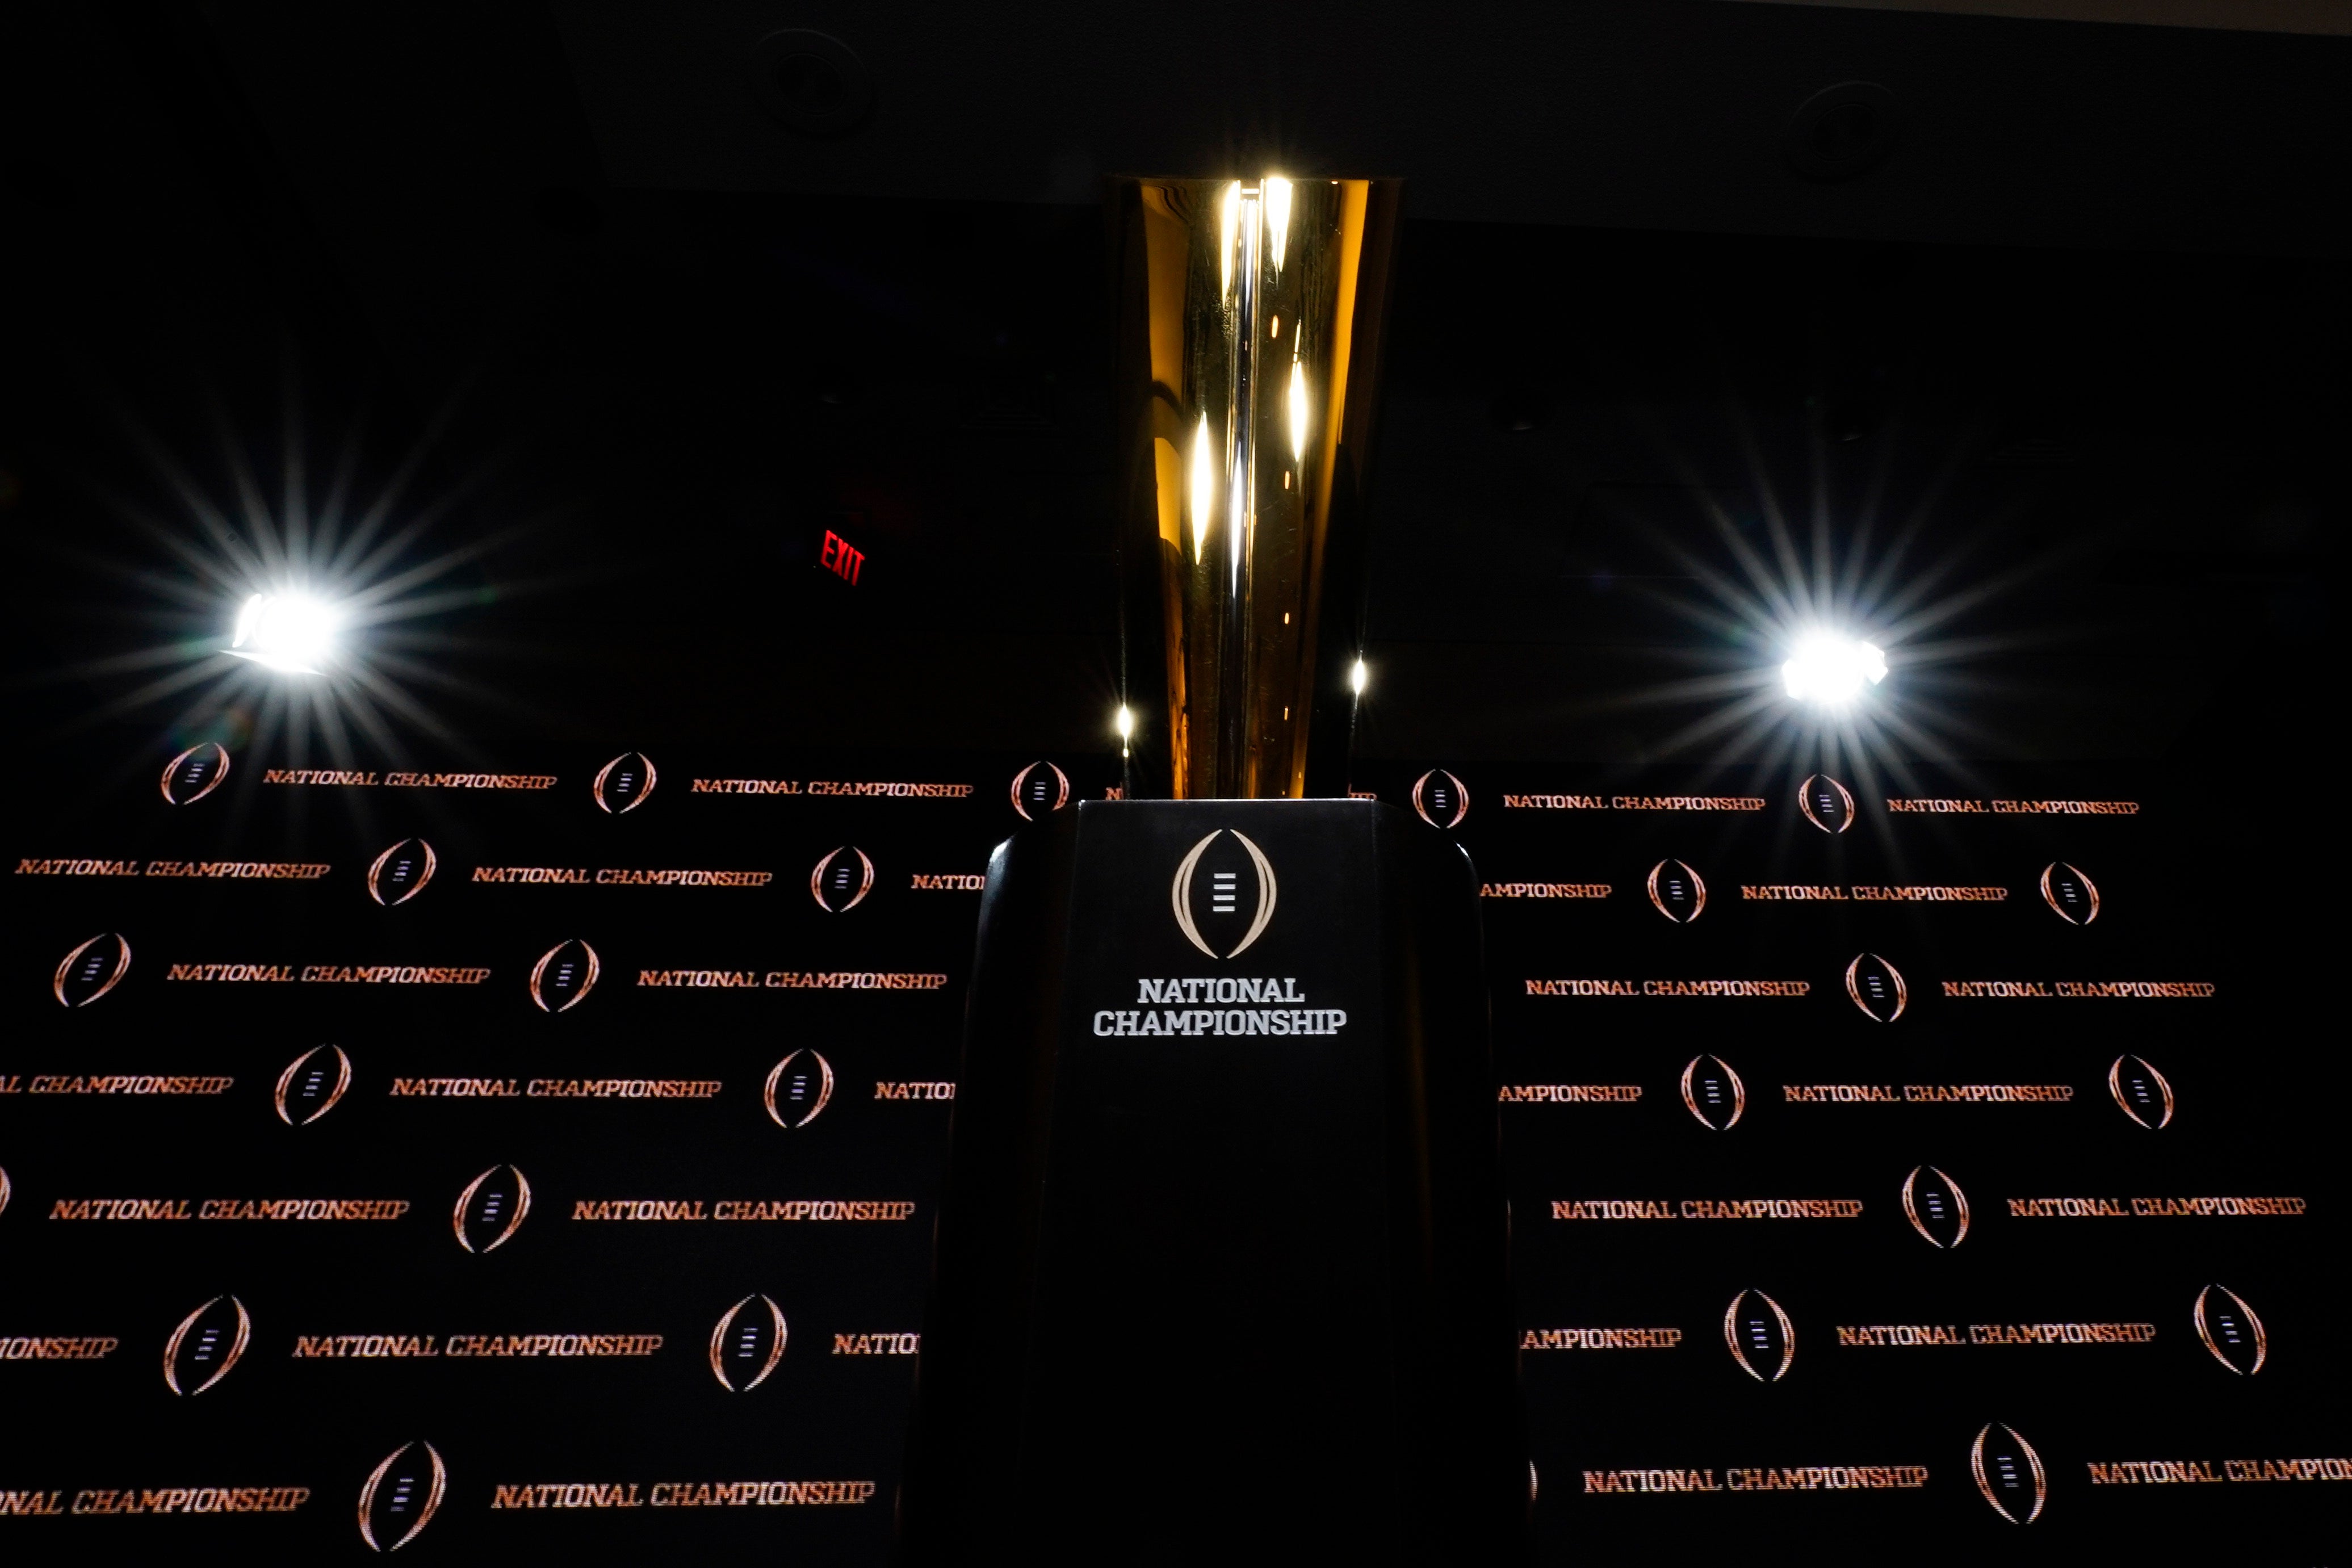 Signs of the times: National Championship football comes to Indy